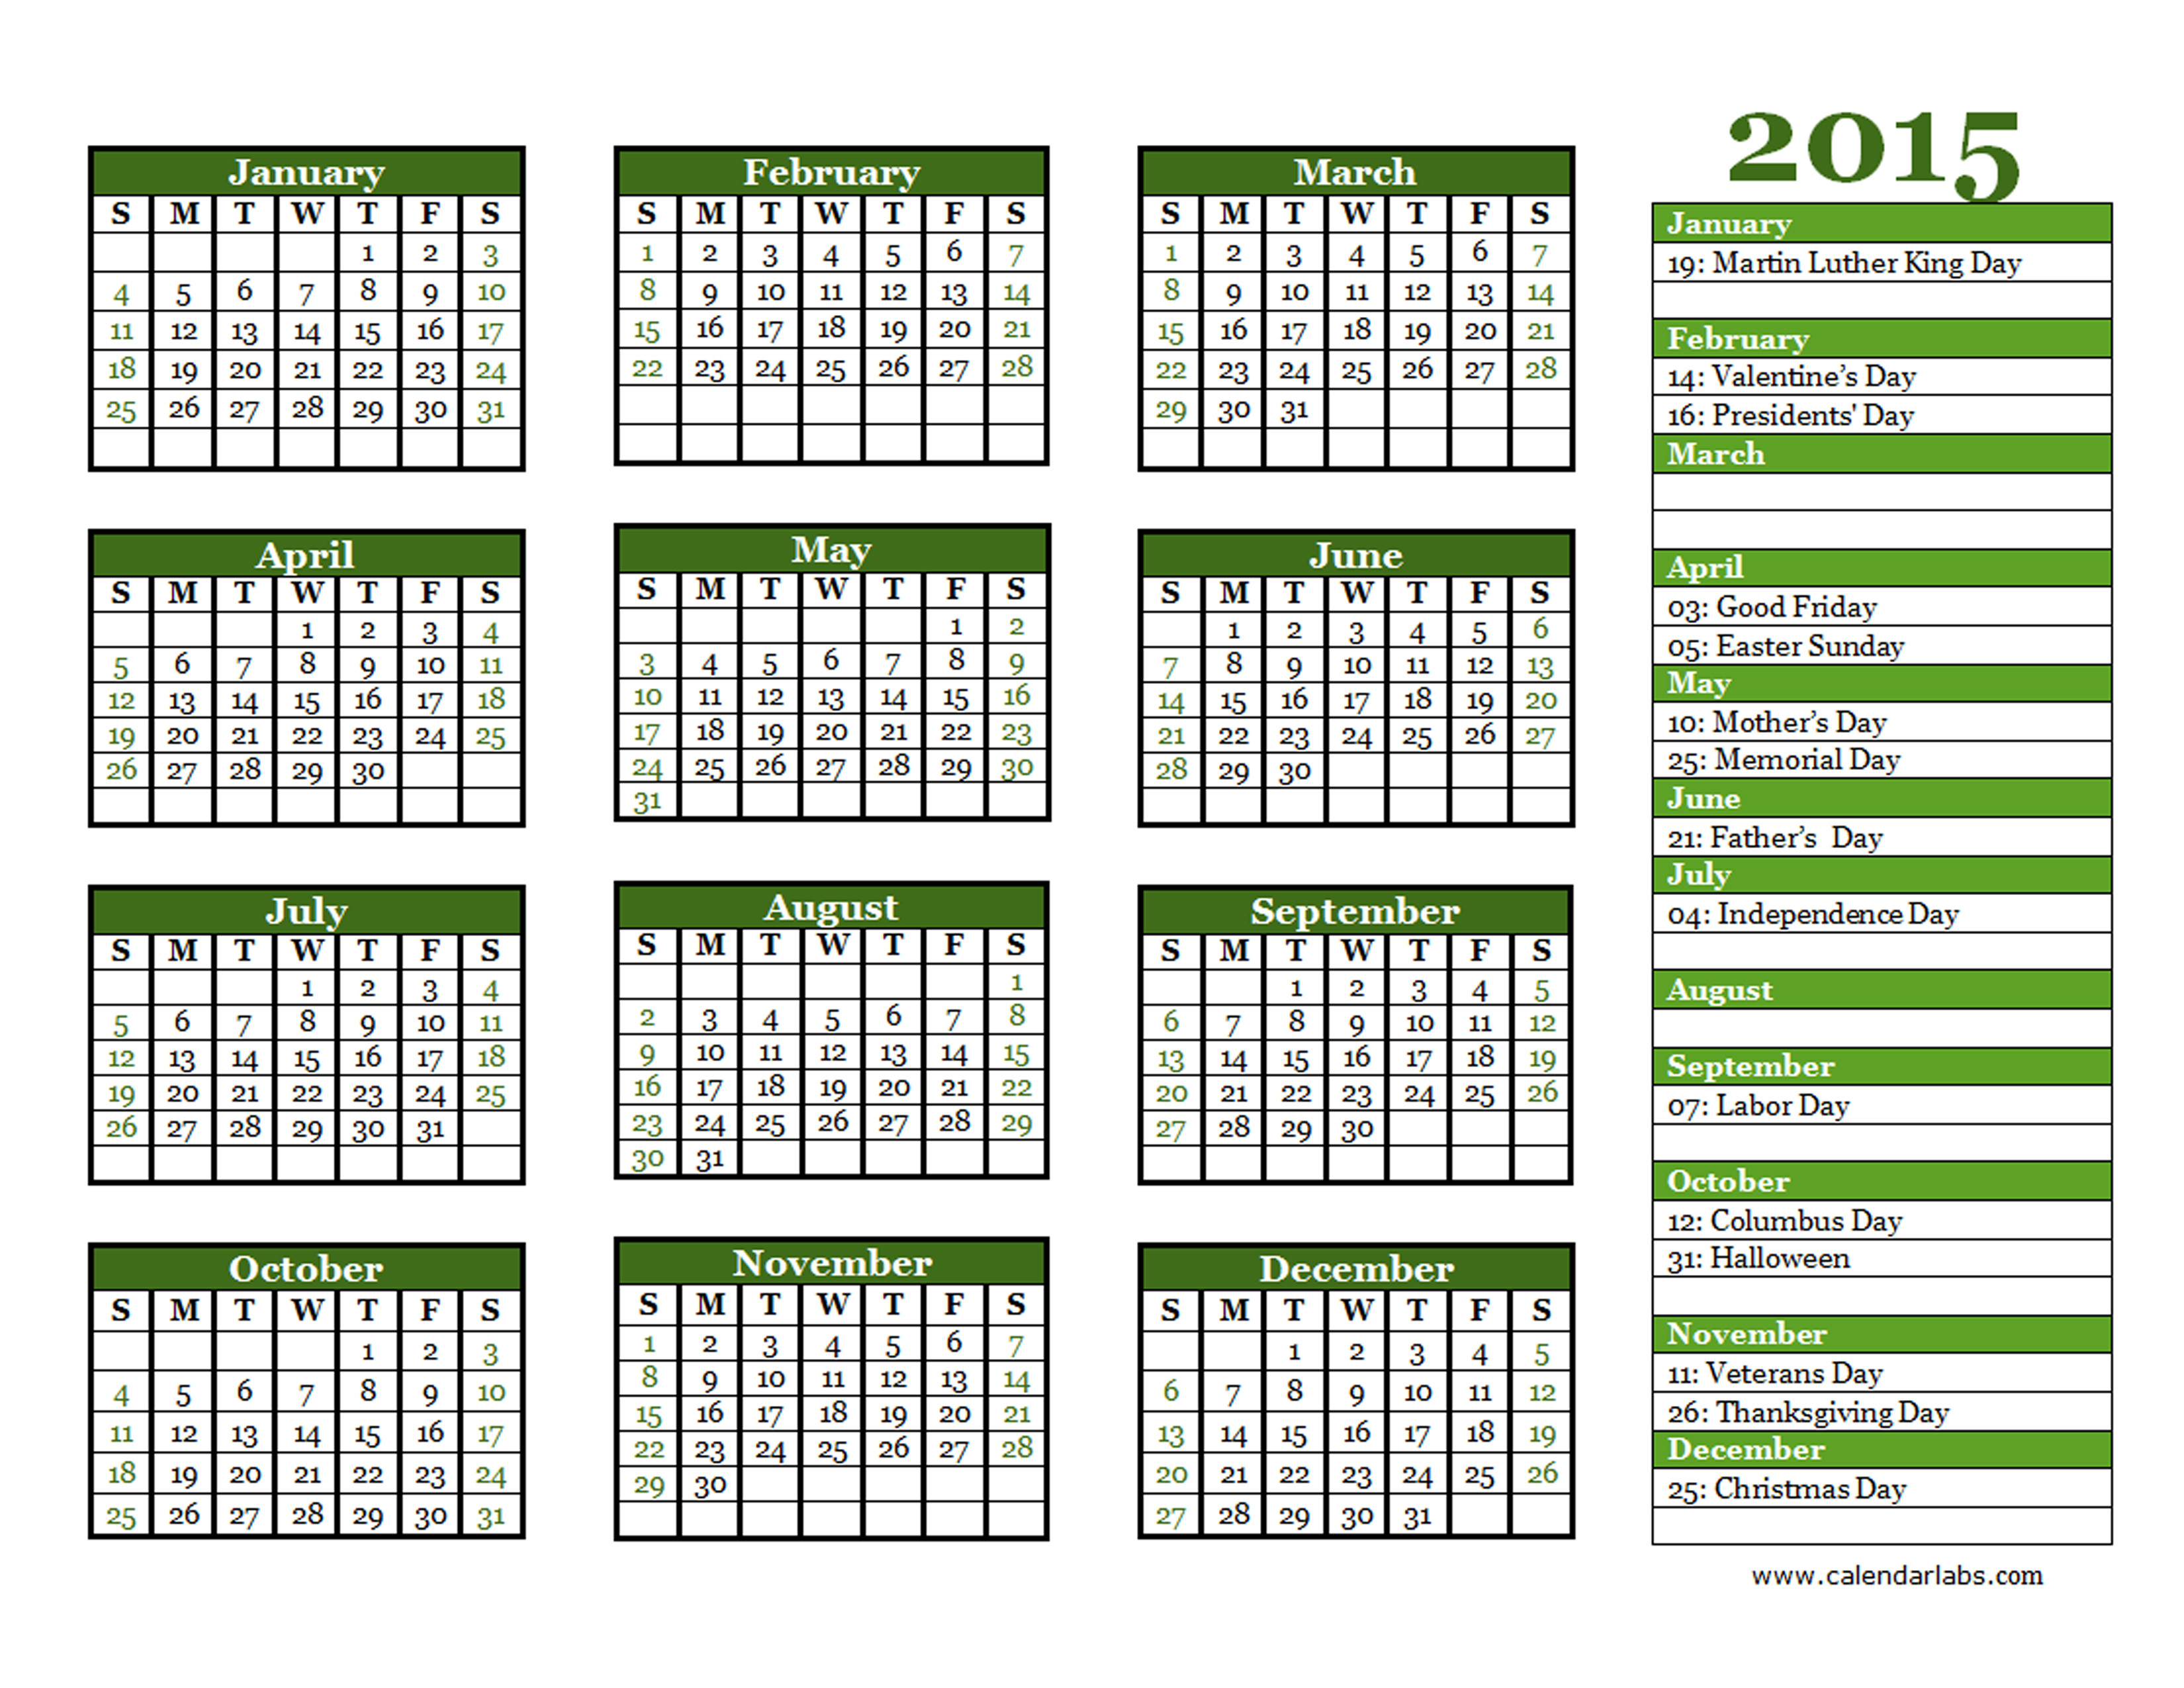 2015 Yearly Calendar Template 06 - Free Printable Templates3300 x 2550